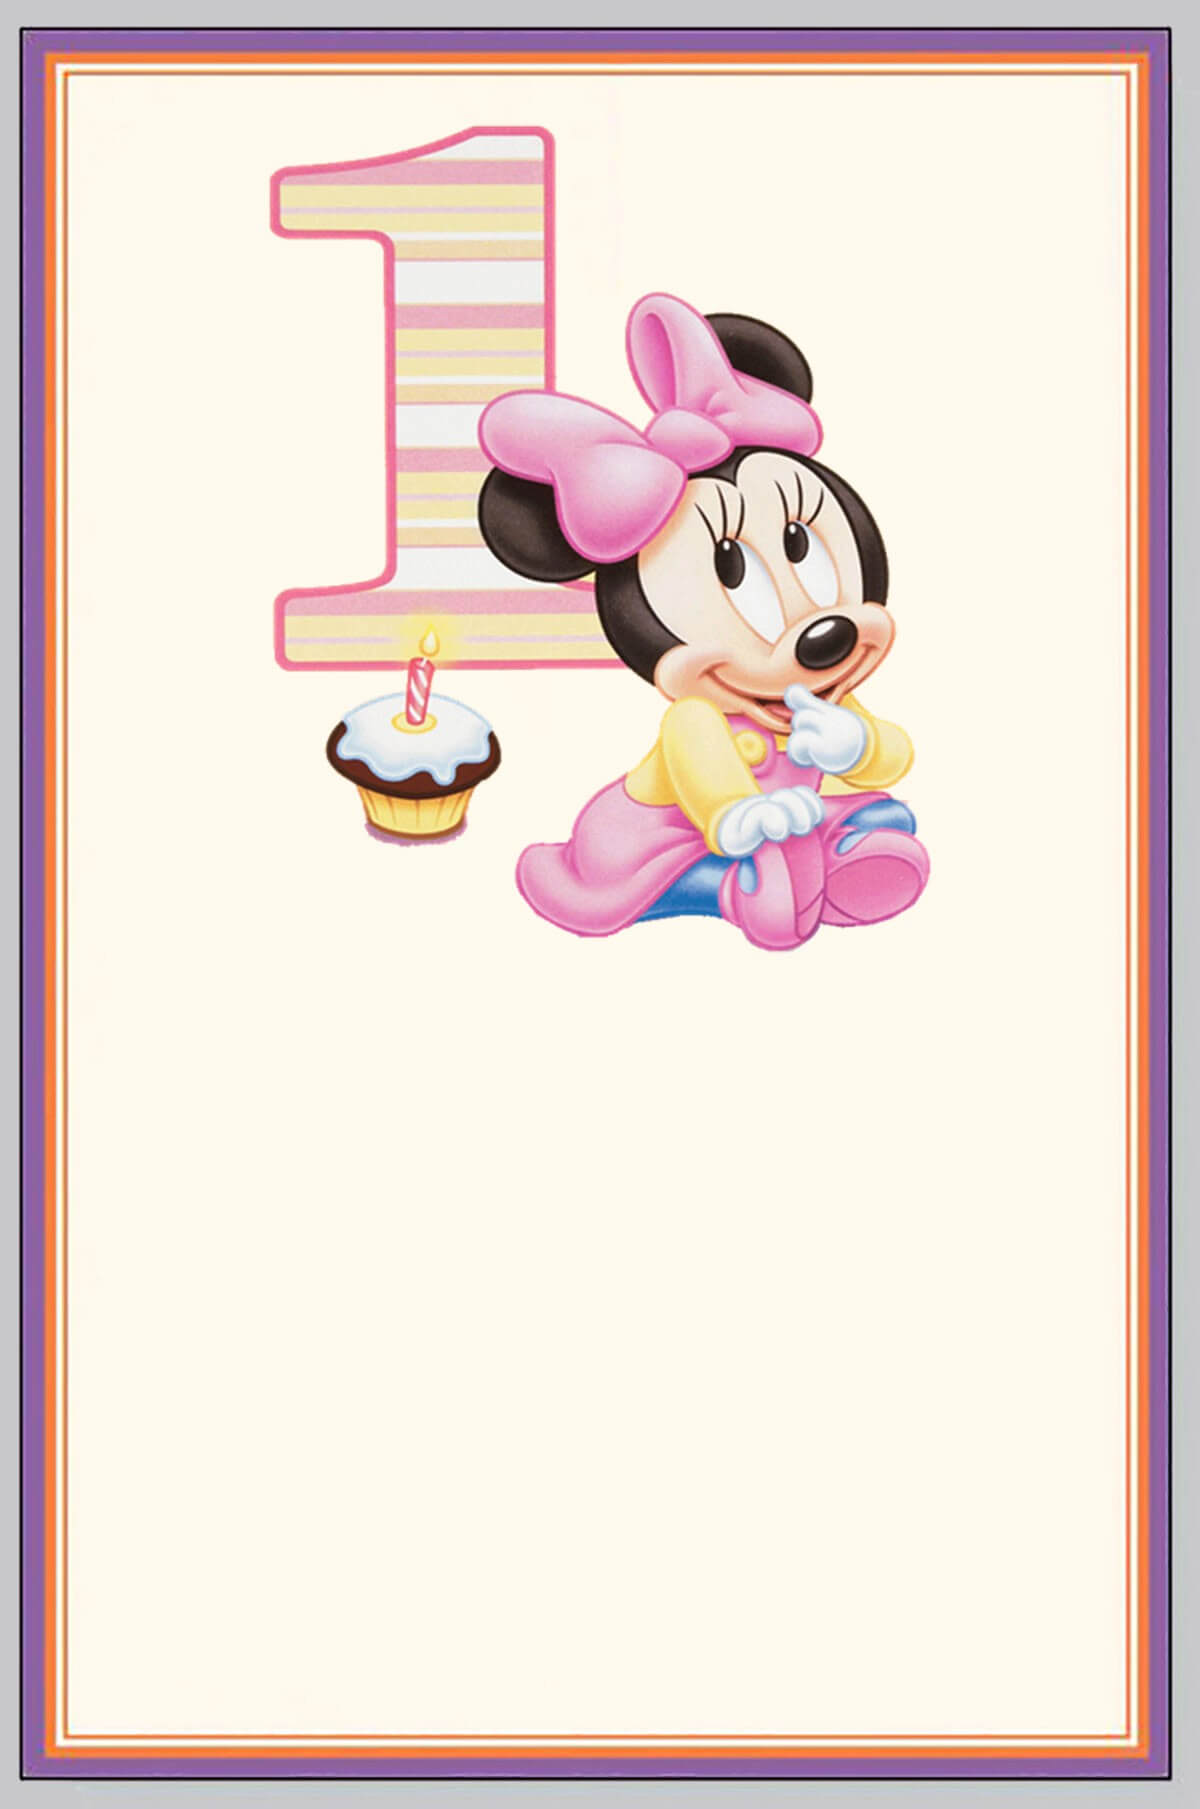 Minnie Mouse First Birthday Invitation Card | Invitations Online Inside Minnie Mouse Card Templates